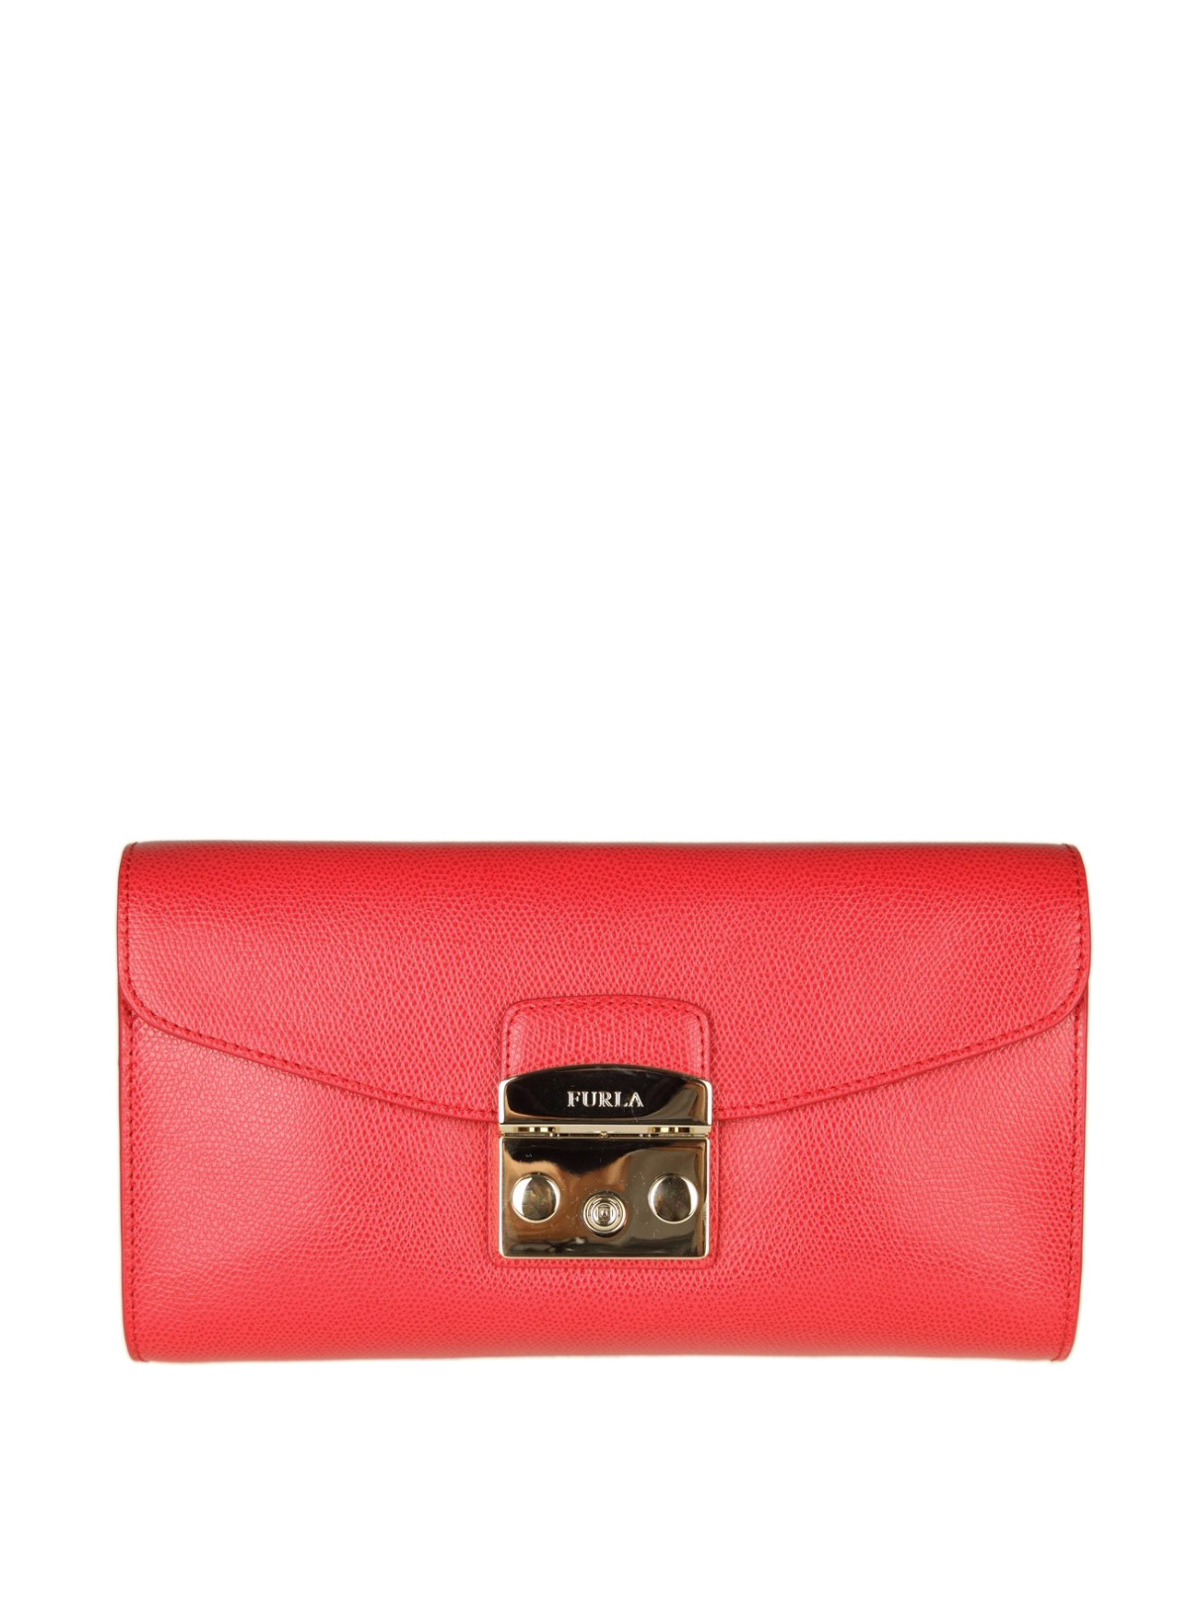 Clutches Furla - Small Metropolis ruby red leather clutch - 962802